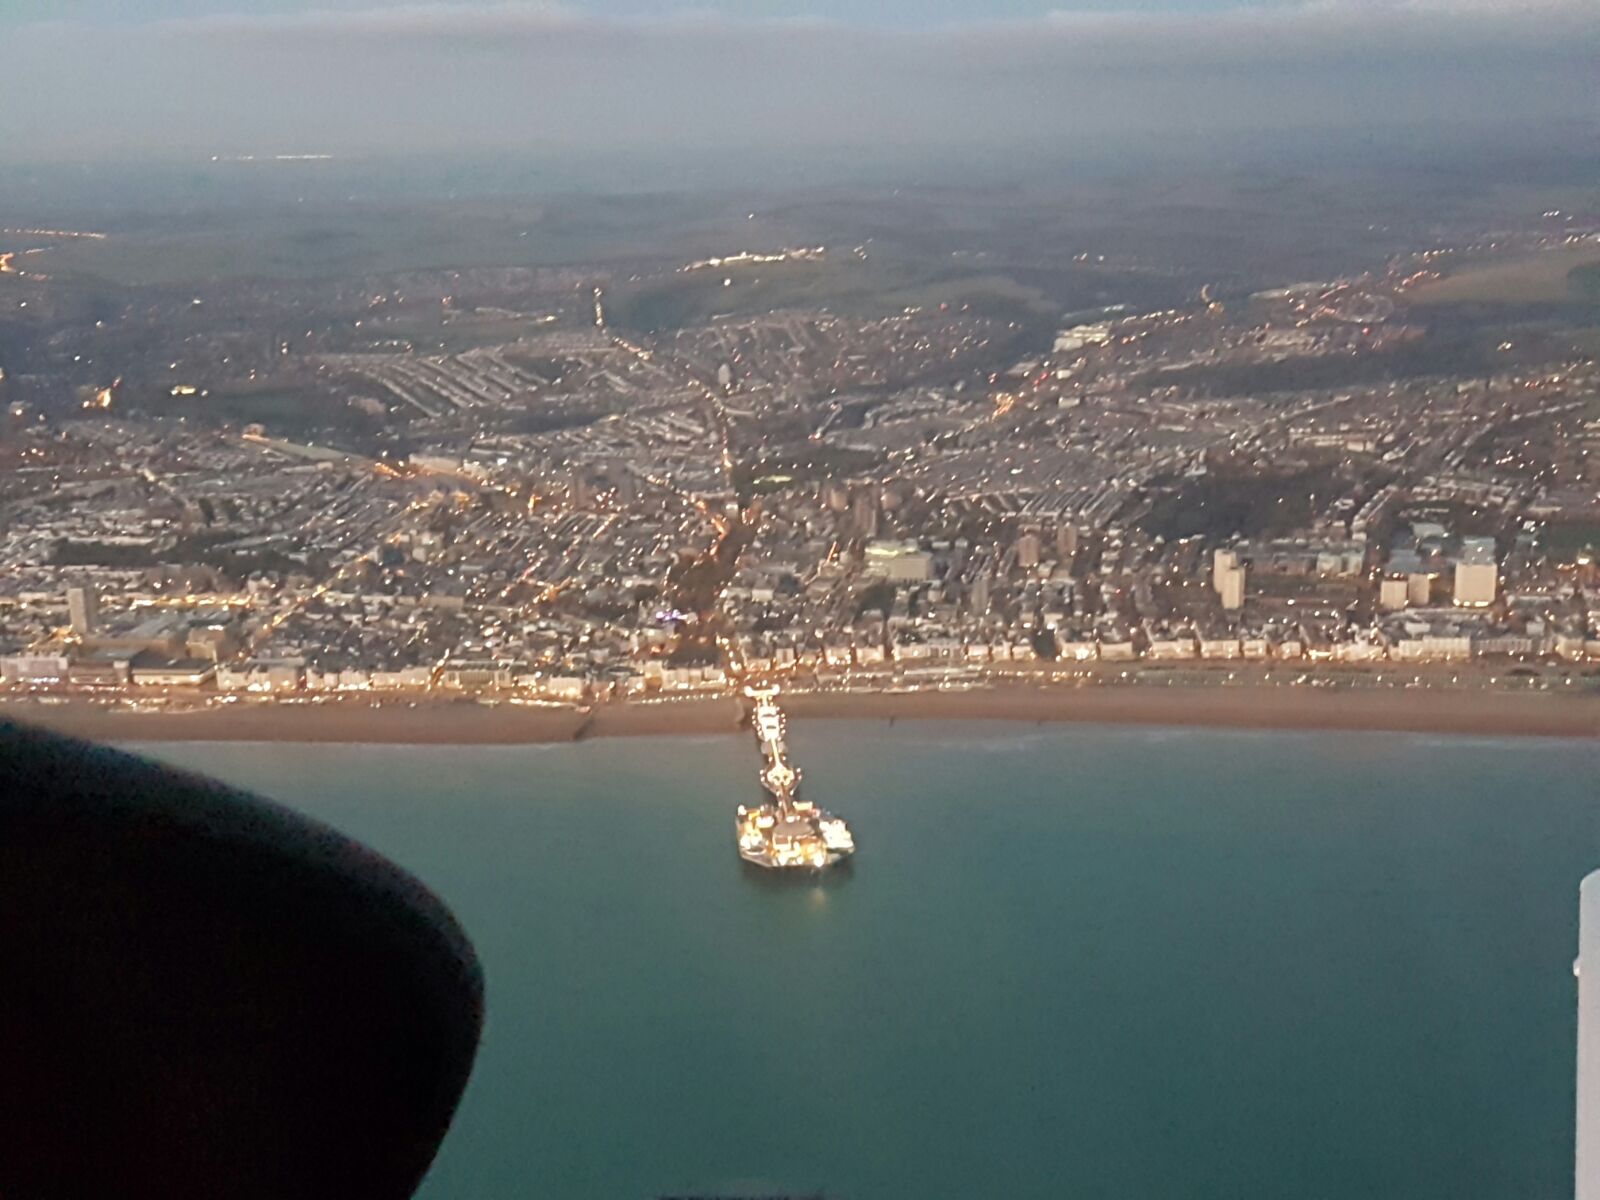 Brighton from the sky